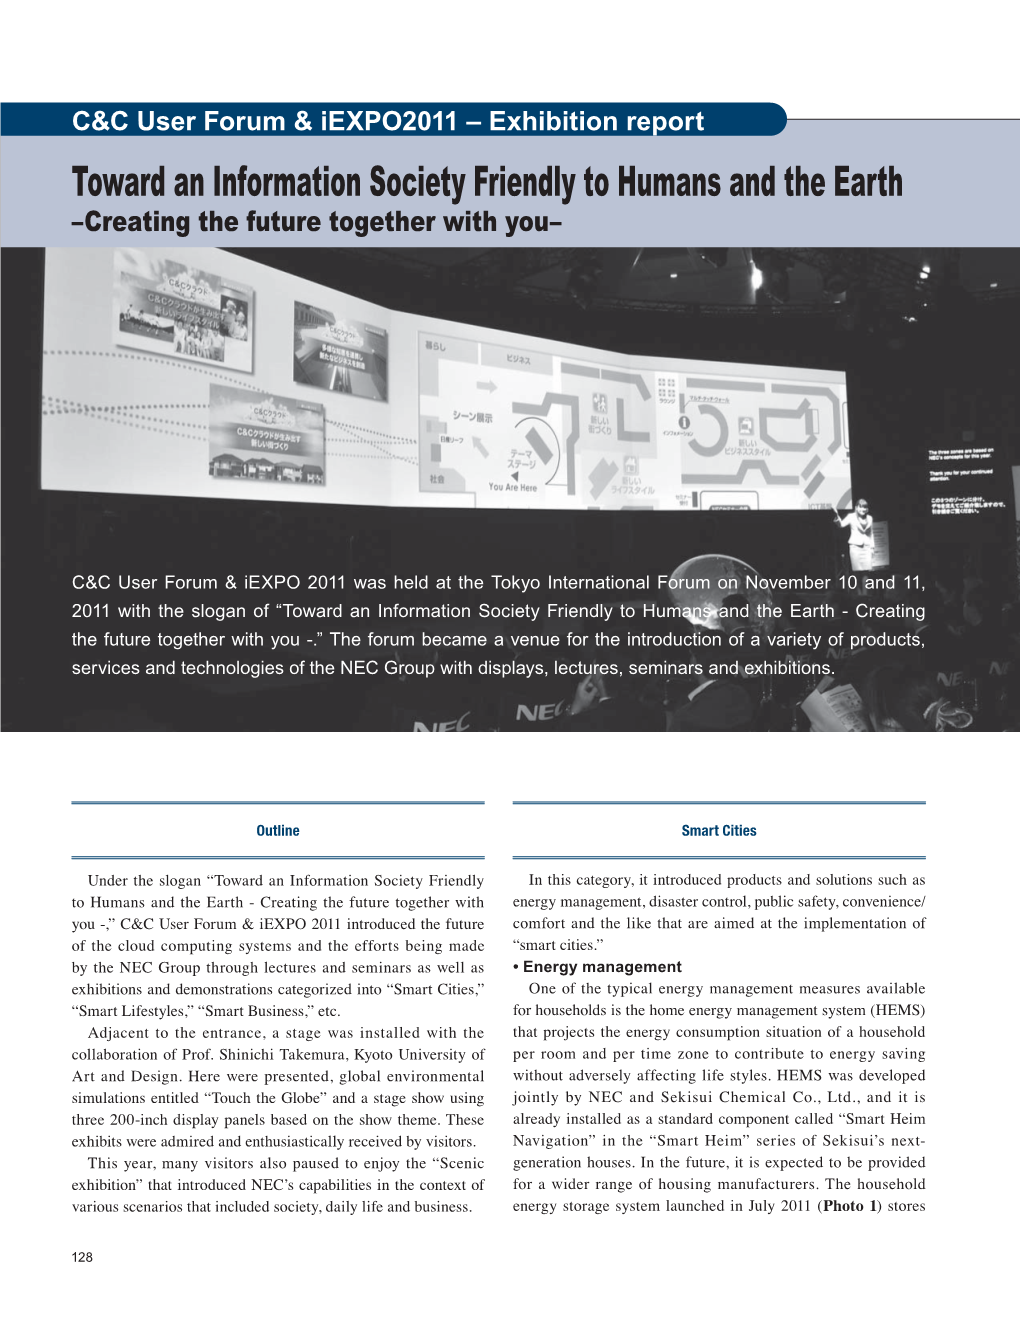 Toward an Information Society Friendly to Humans and the Earth –Creating the Future Together with You–